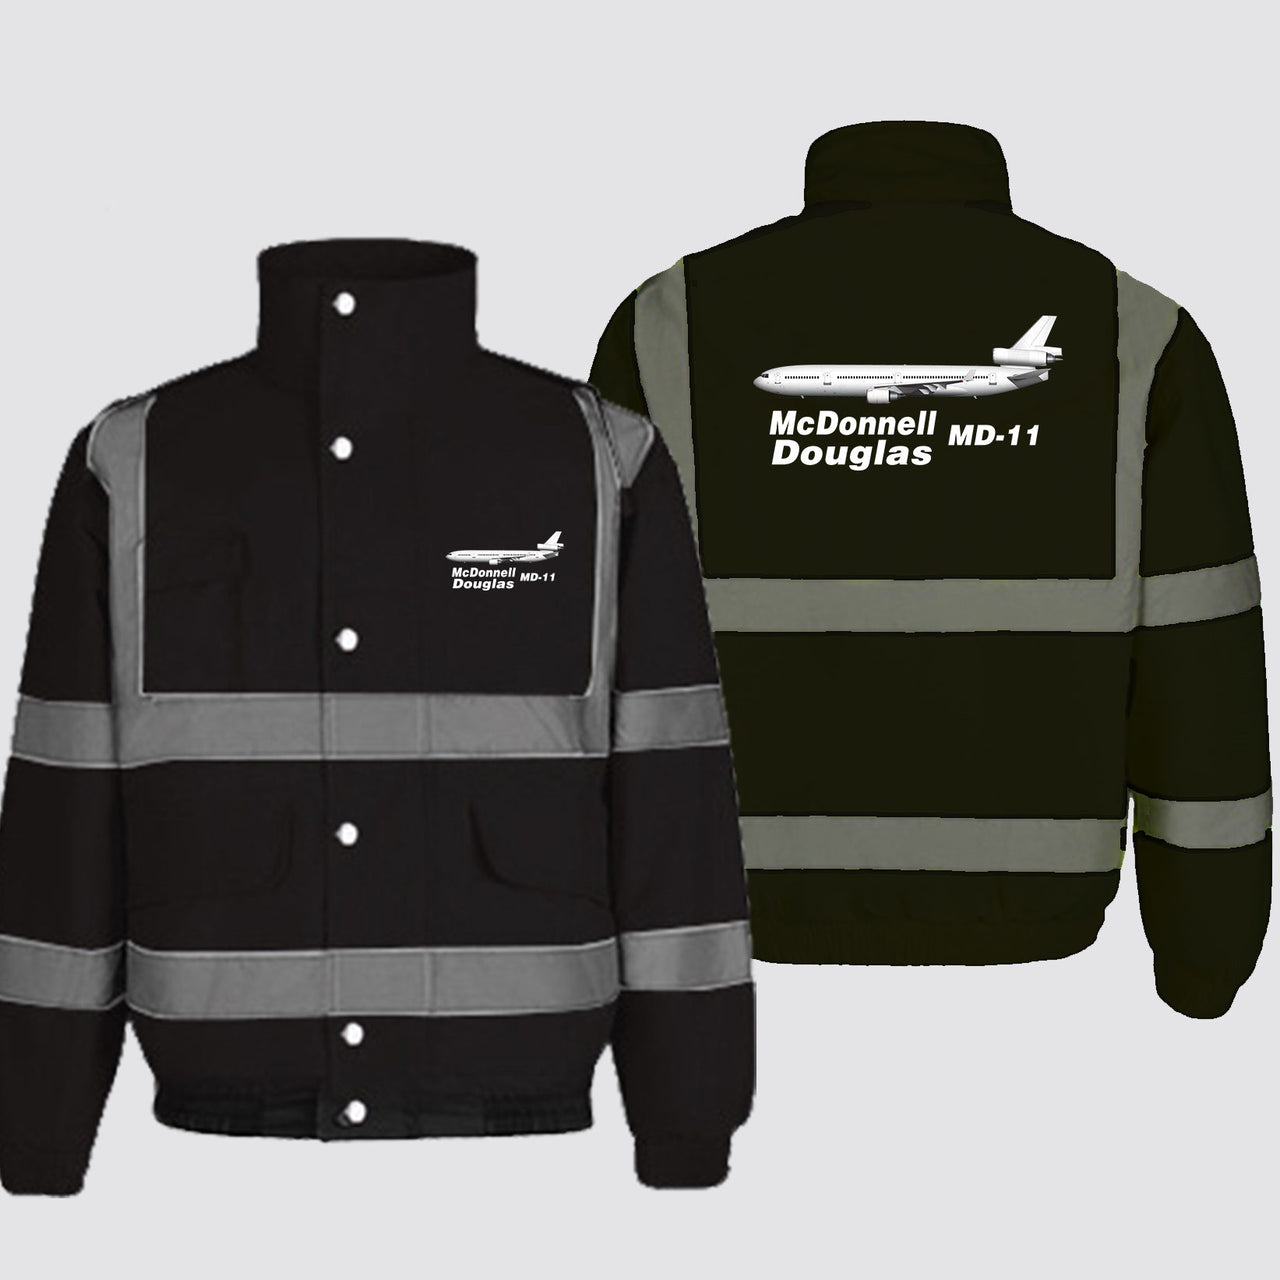 The McDonnell Douglas MD-11 Designed Reflective Winter Jackets